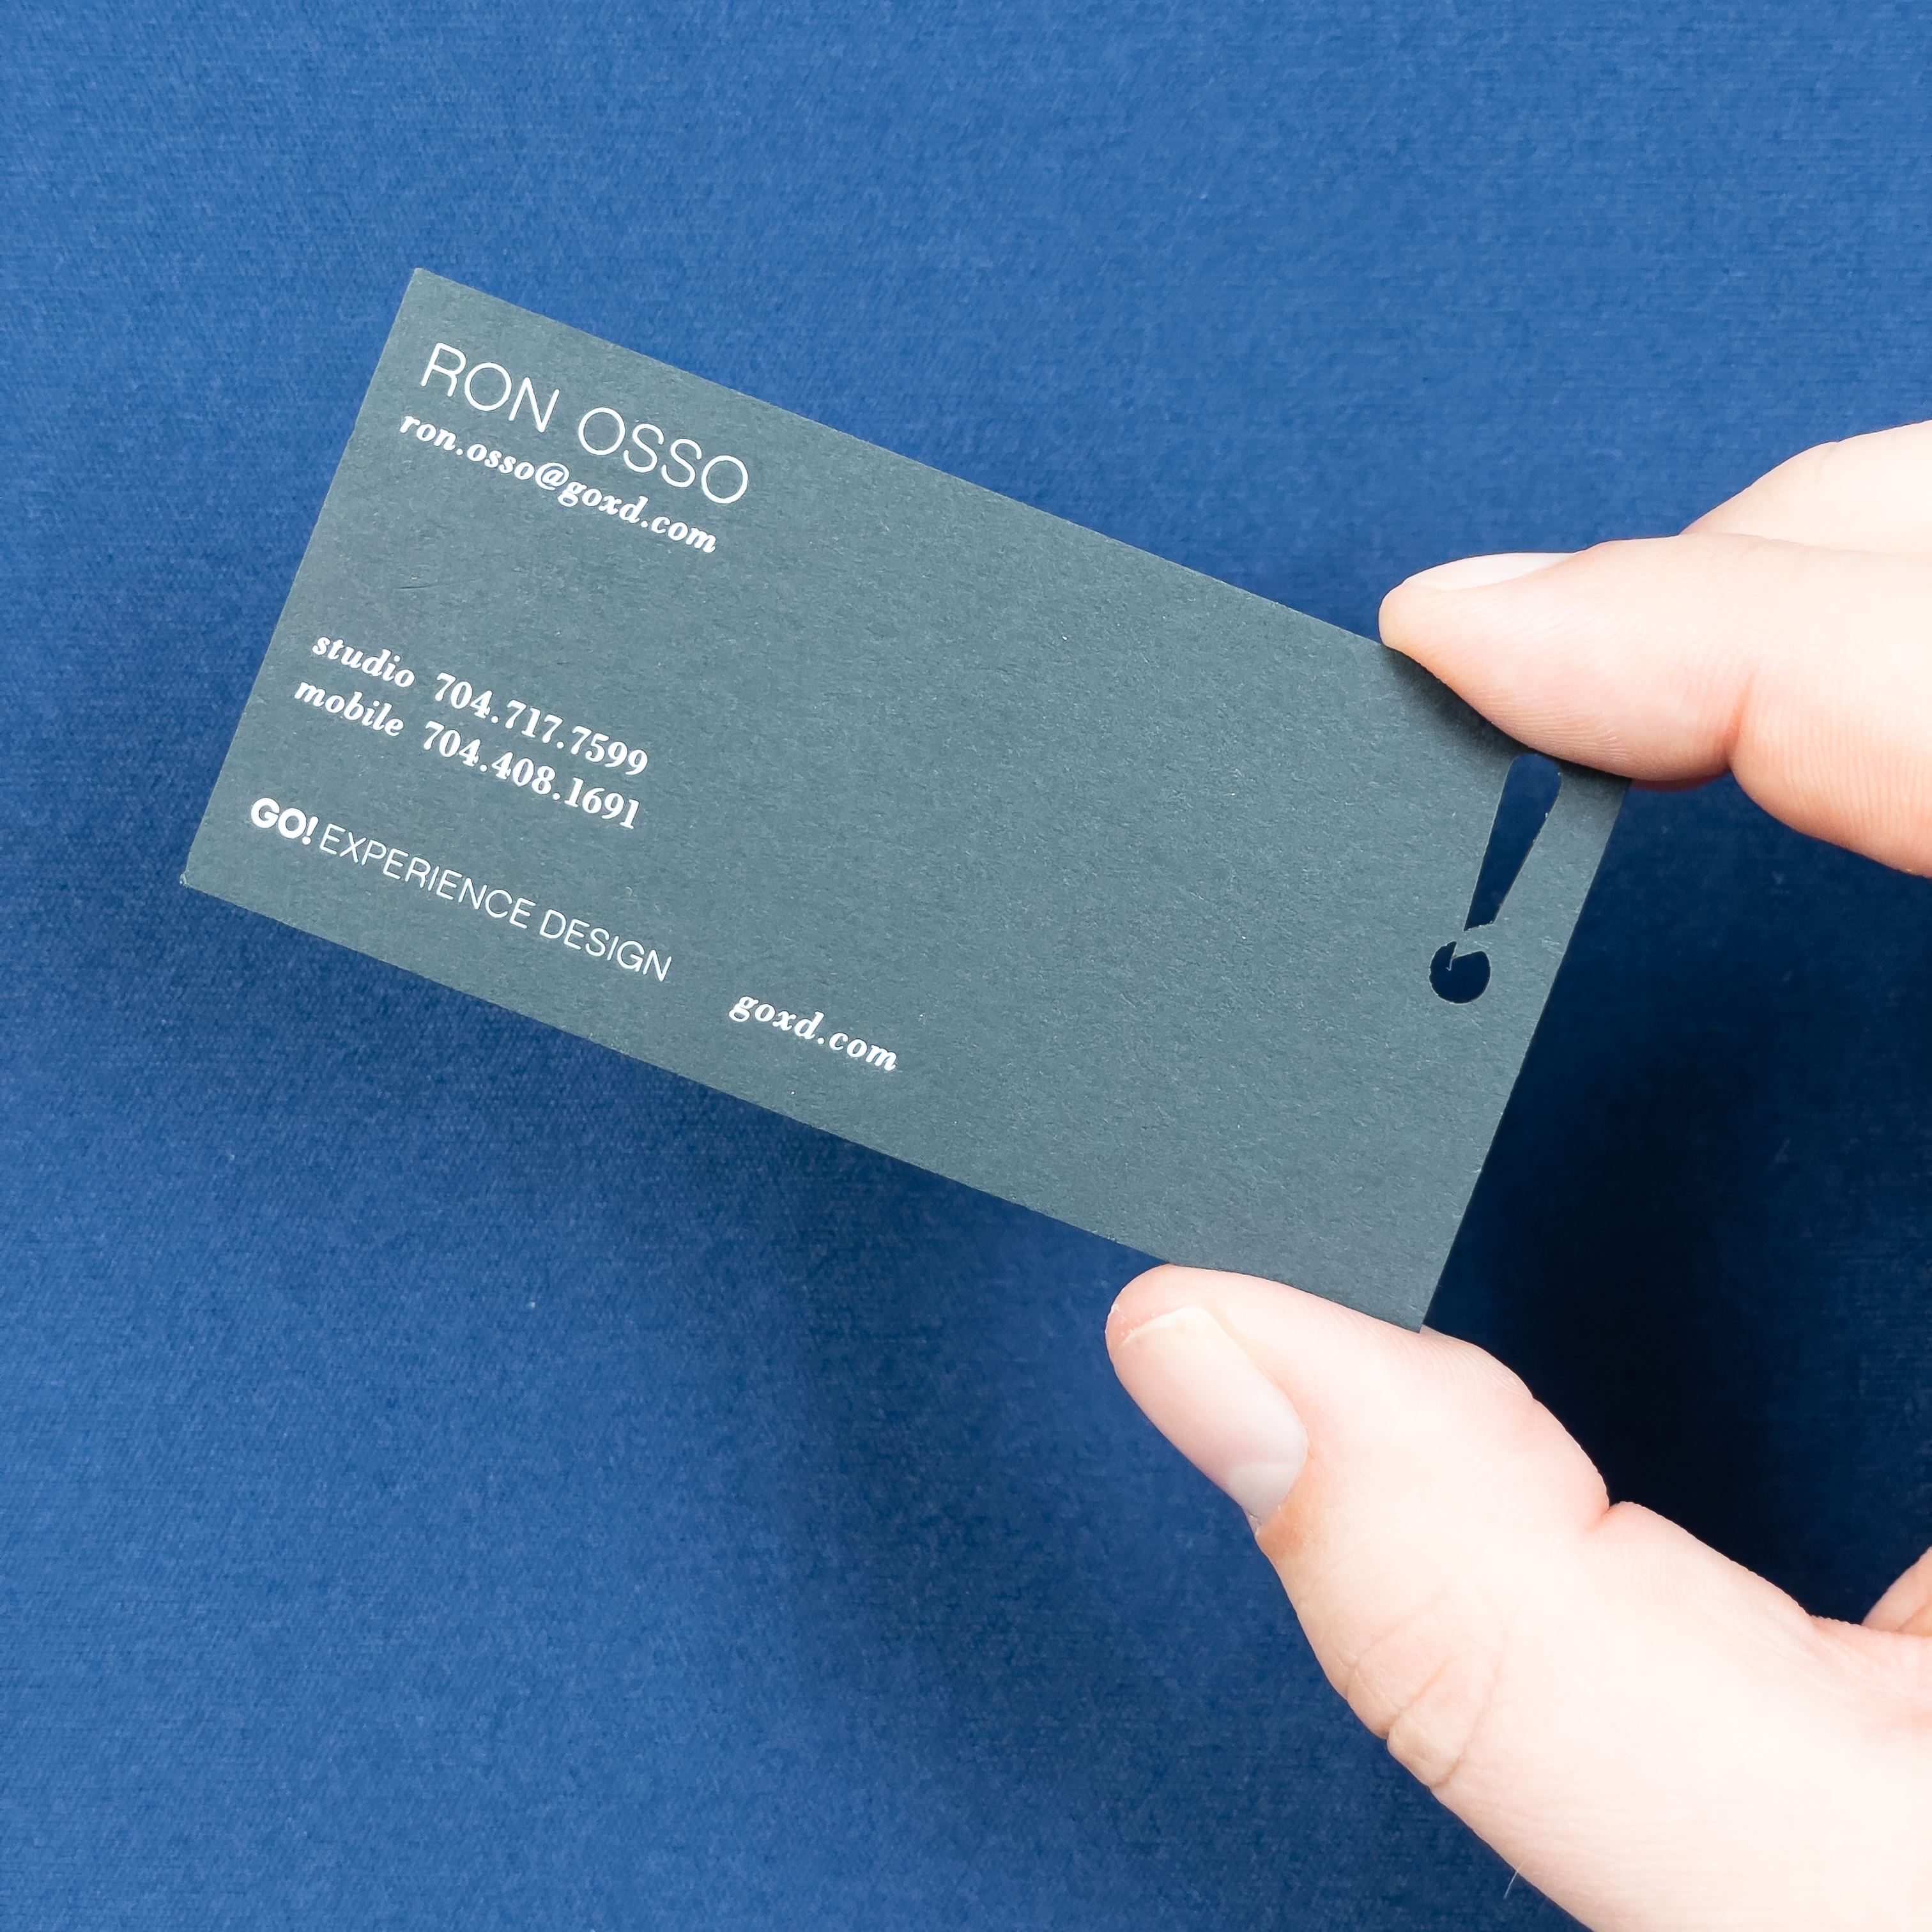 An image of a business card with an exclamation point die cut out of the card.